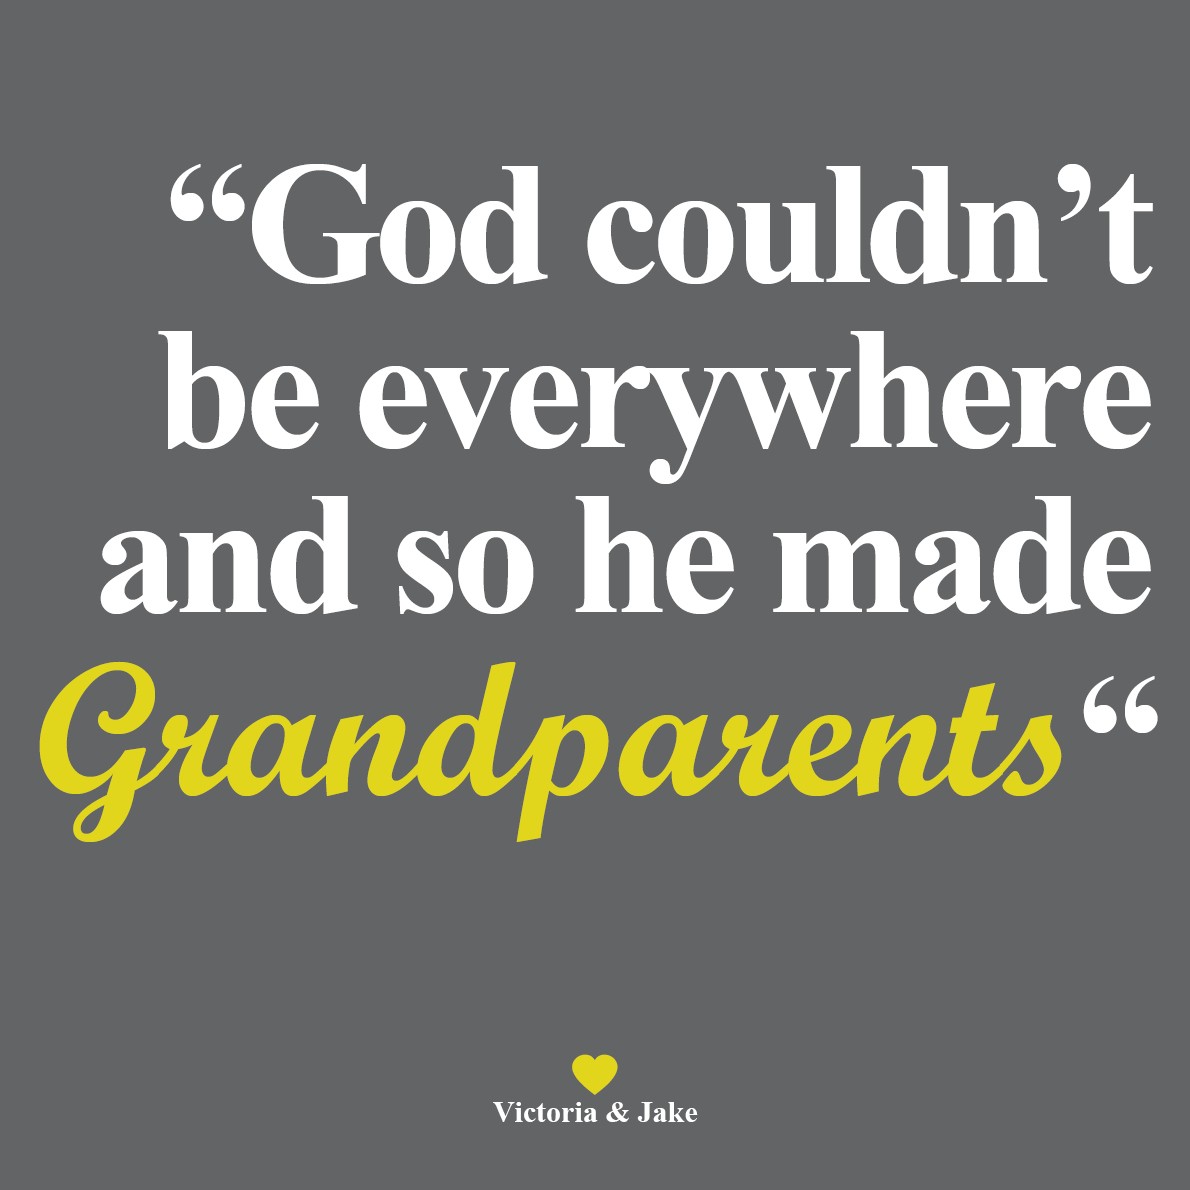 http://www.commentskart.com/wp-content/uploads/2013/09/Grandfather-Quotes-22.jpg